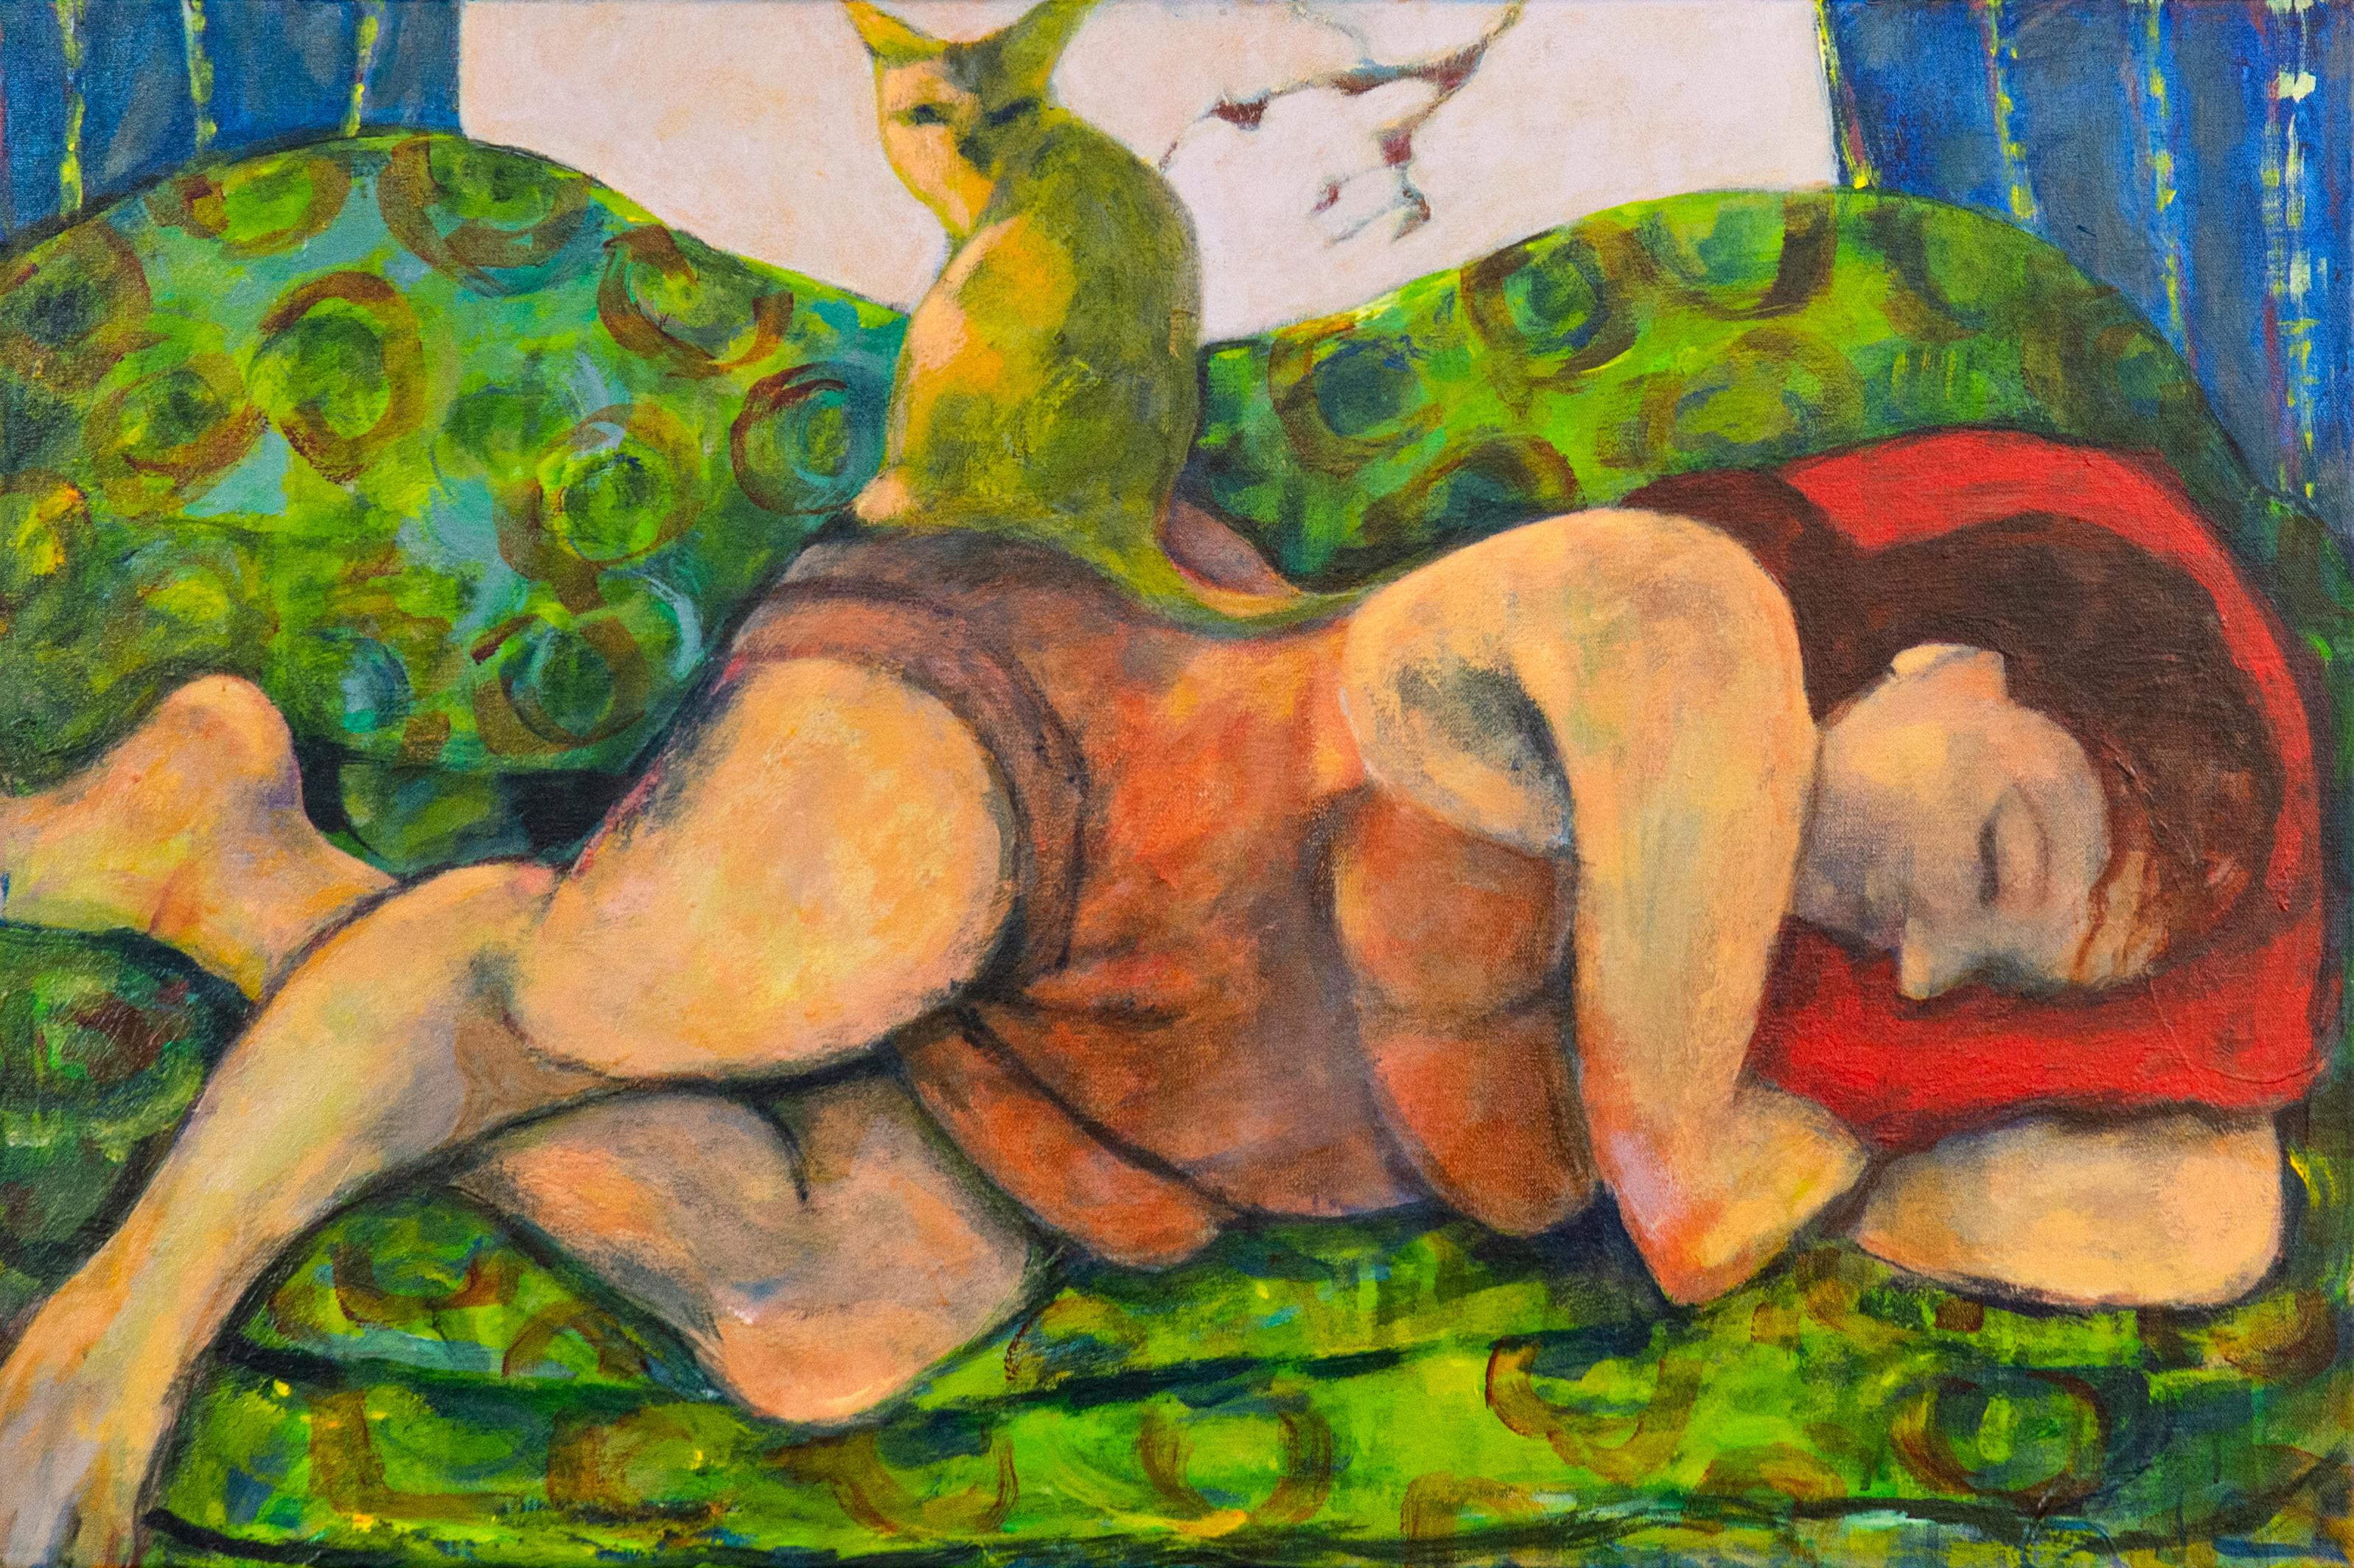 Sandra Jones Campbell Figurative Painting - "The Sentinel: Sleeping Until Spring " Contemporary Expressionist Figure 